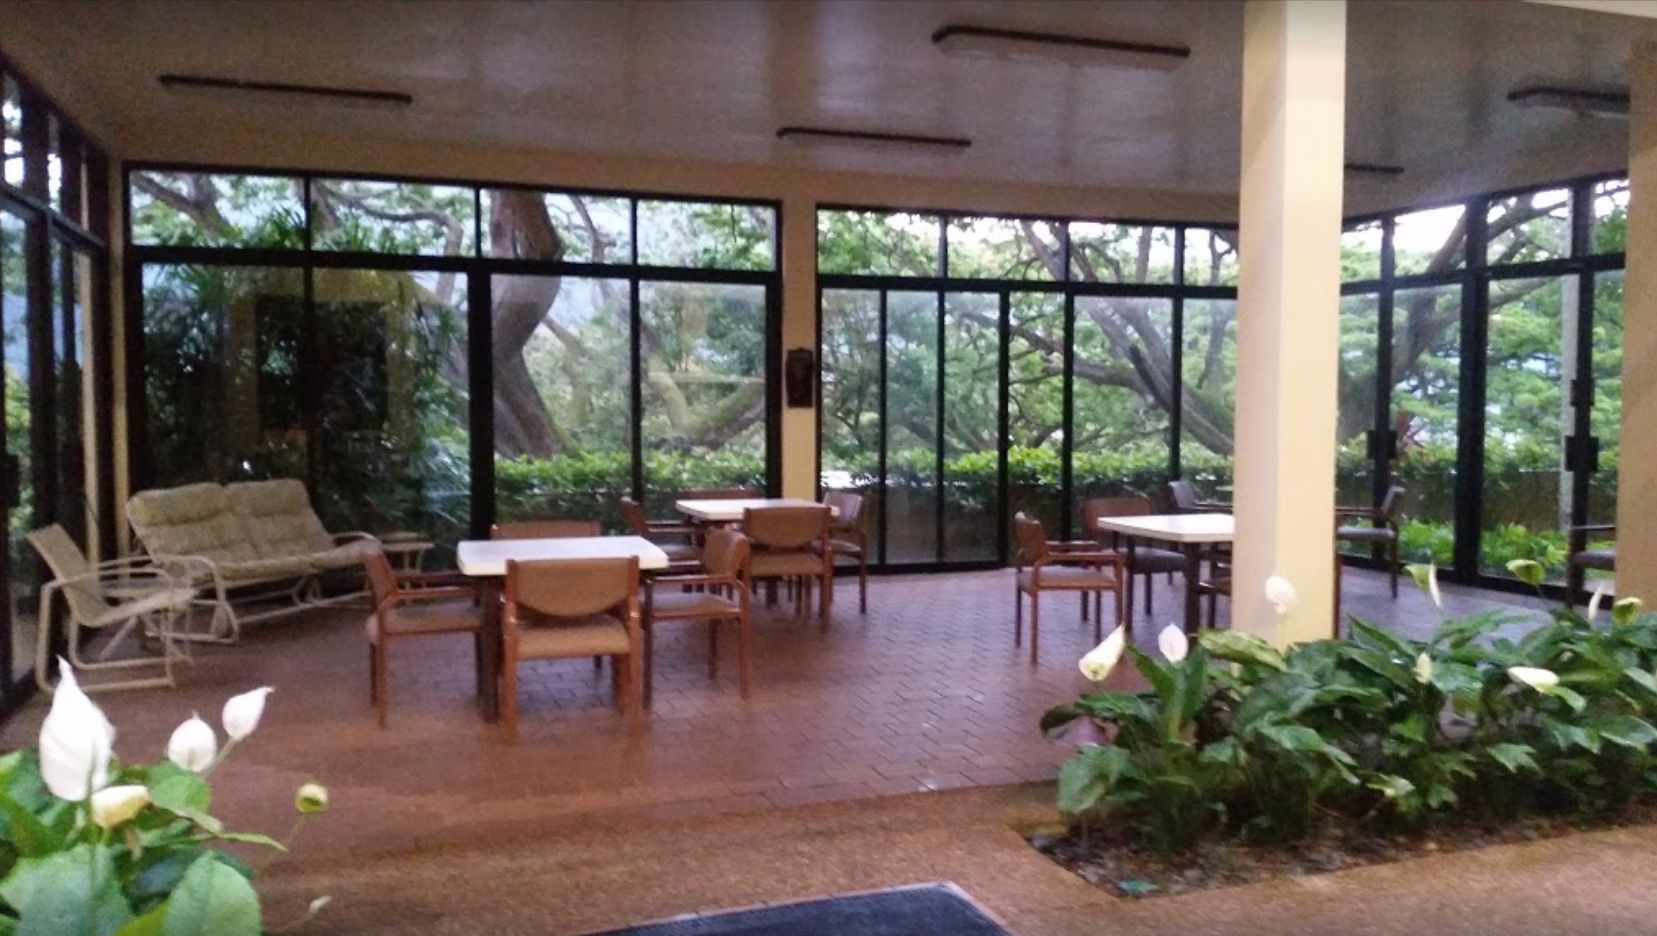 Senior living community Pohai Nani featuring tennis sport, indoor and outdoor furniture, and lush nature.